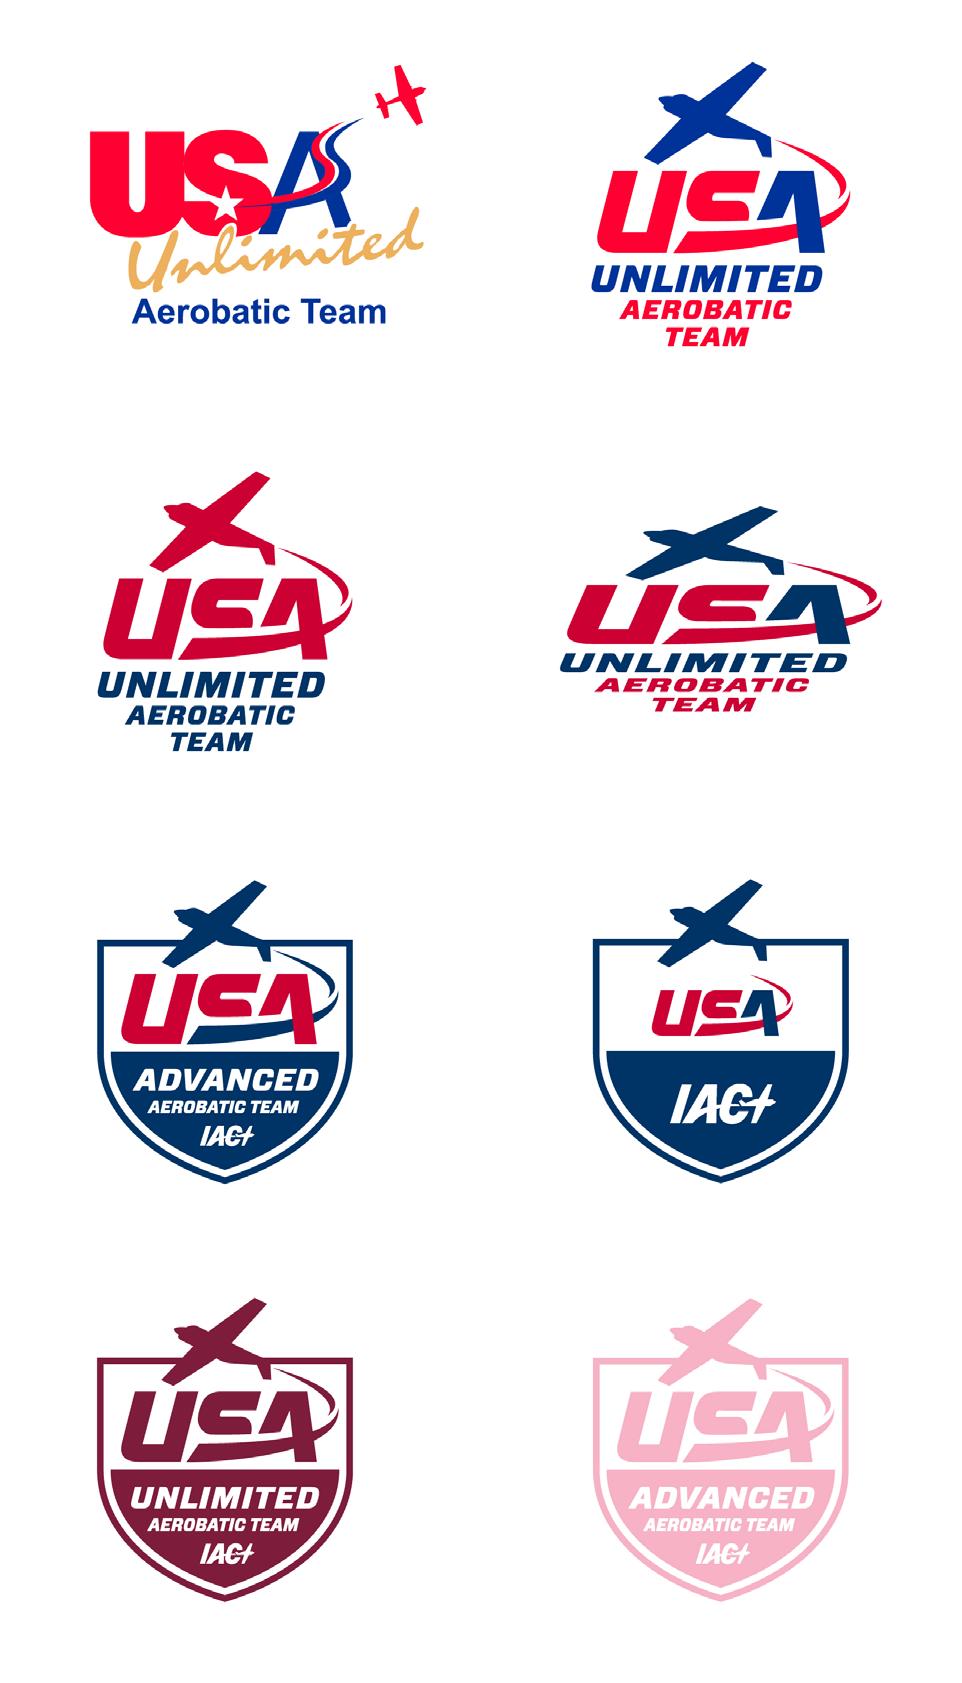 LOGO USAGE RULES UNACCEPTABLE USAGE When using the USA Team Shields or Logotypes on communications, always use approved artwork and do not alter, distort or replace any of the logo elements.